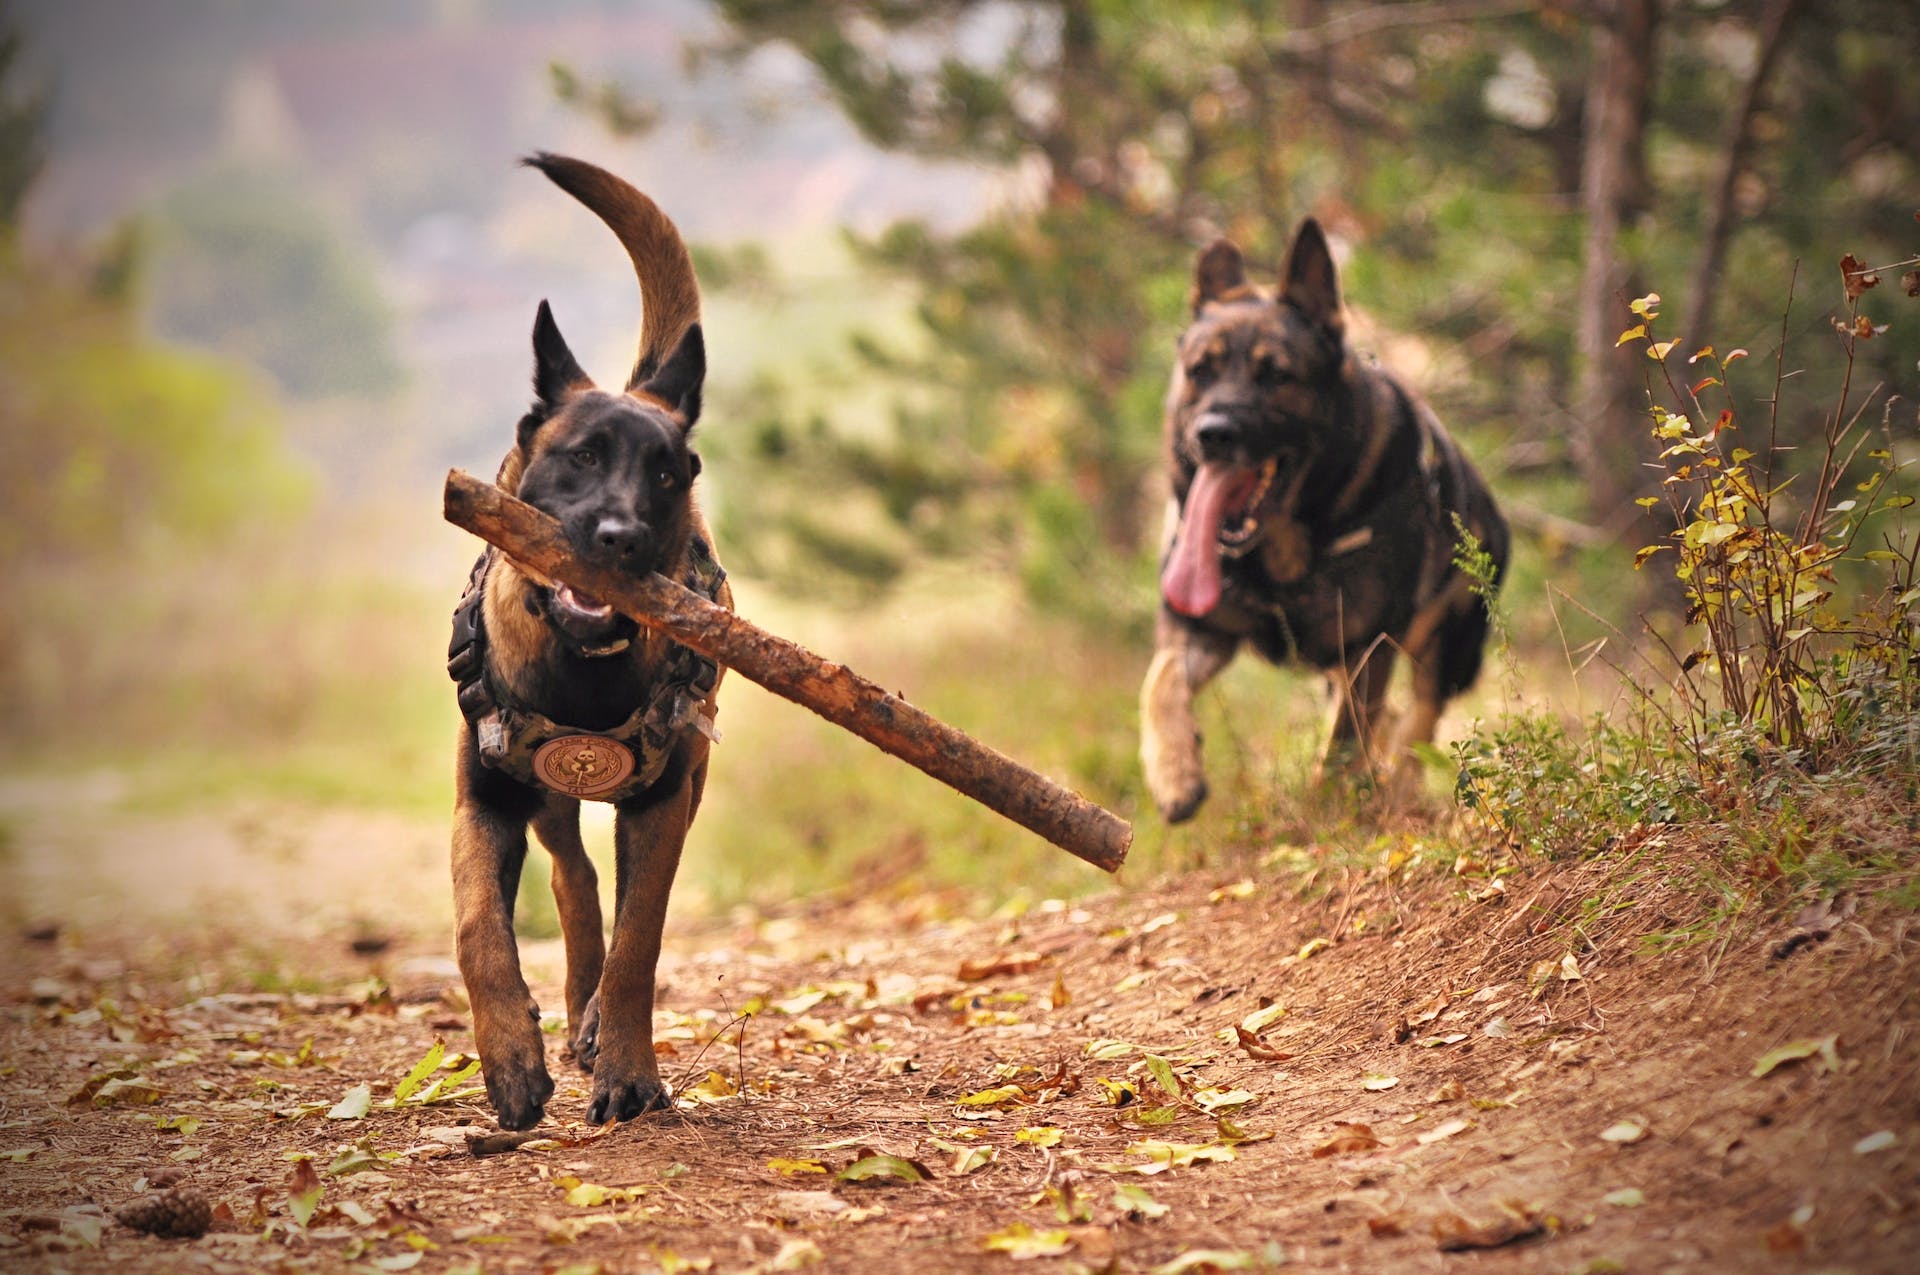 A dog chasing another carrying a stick in their mouth